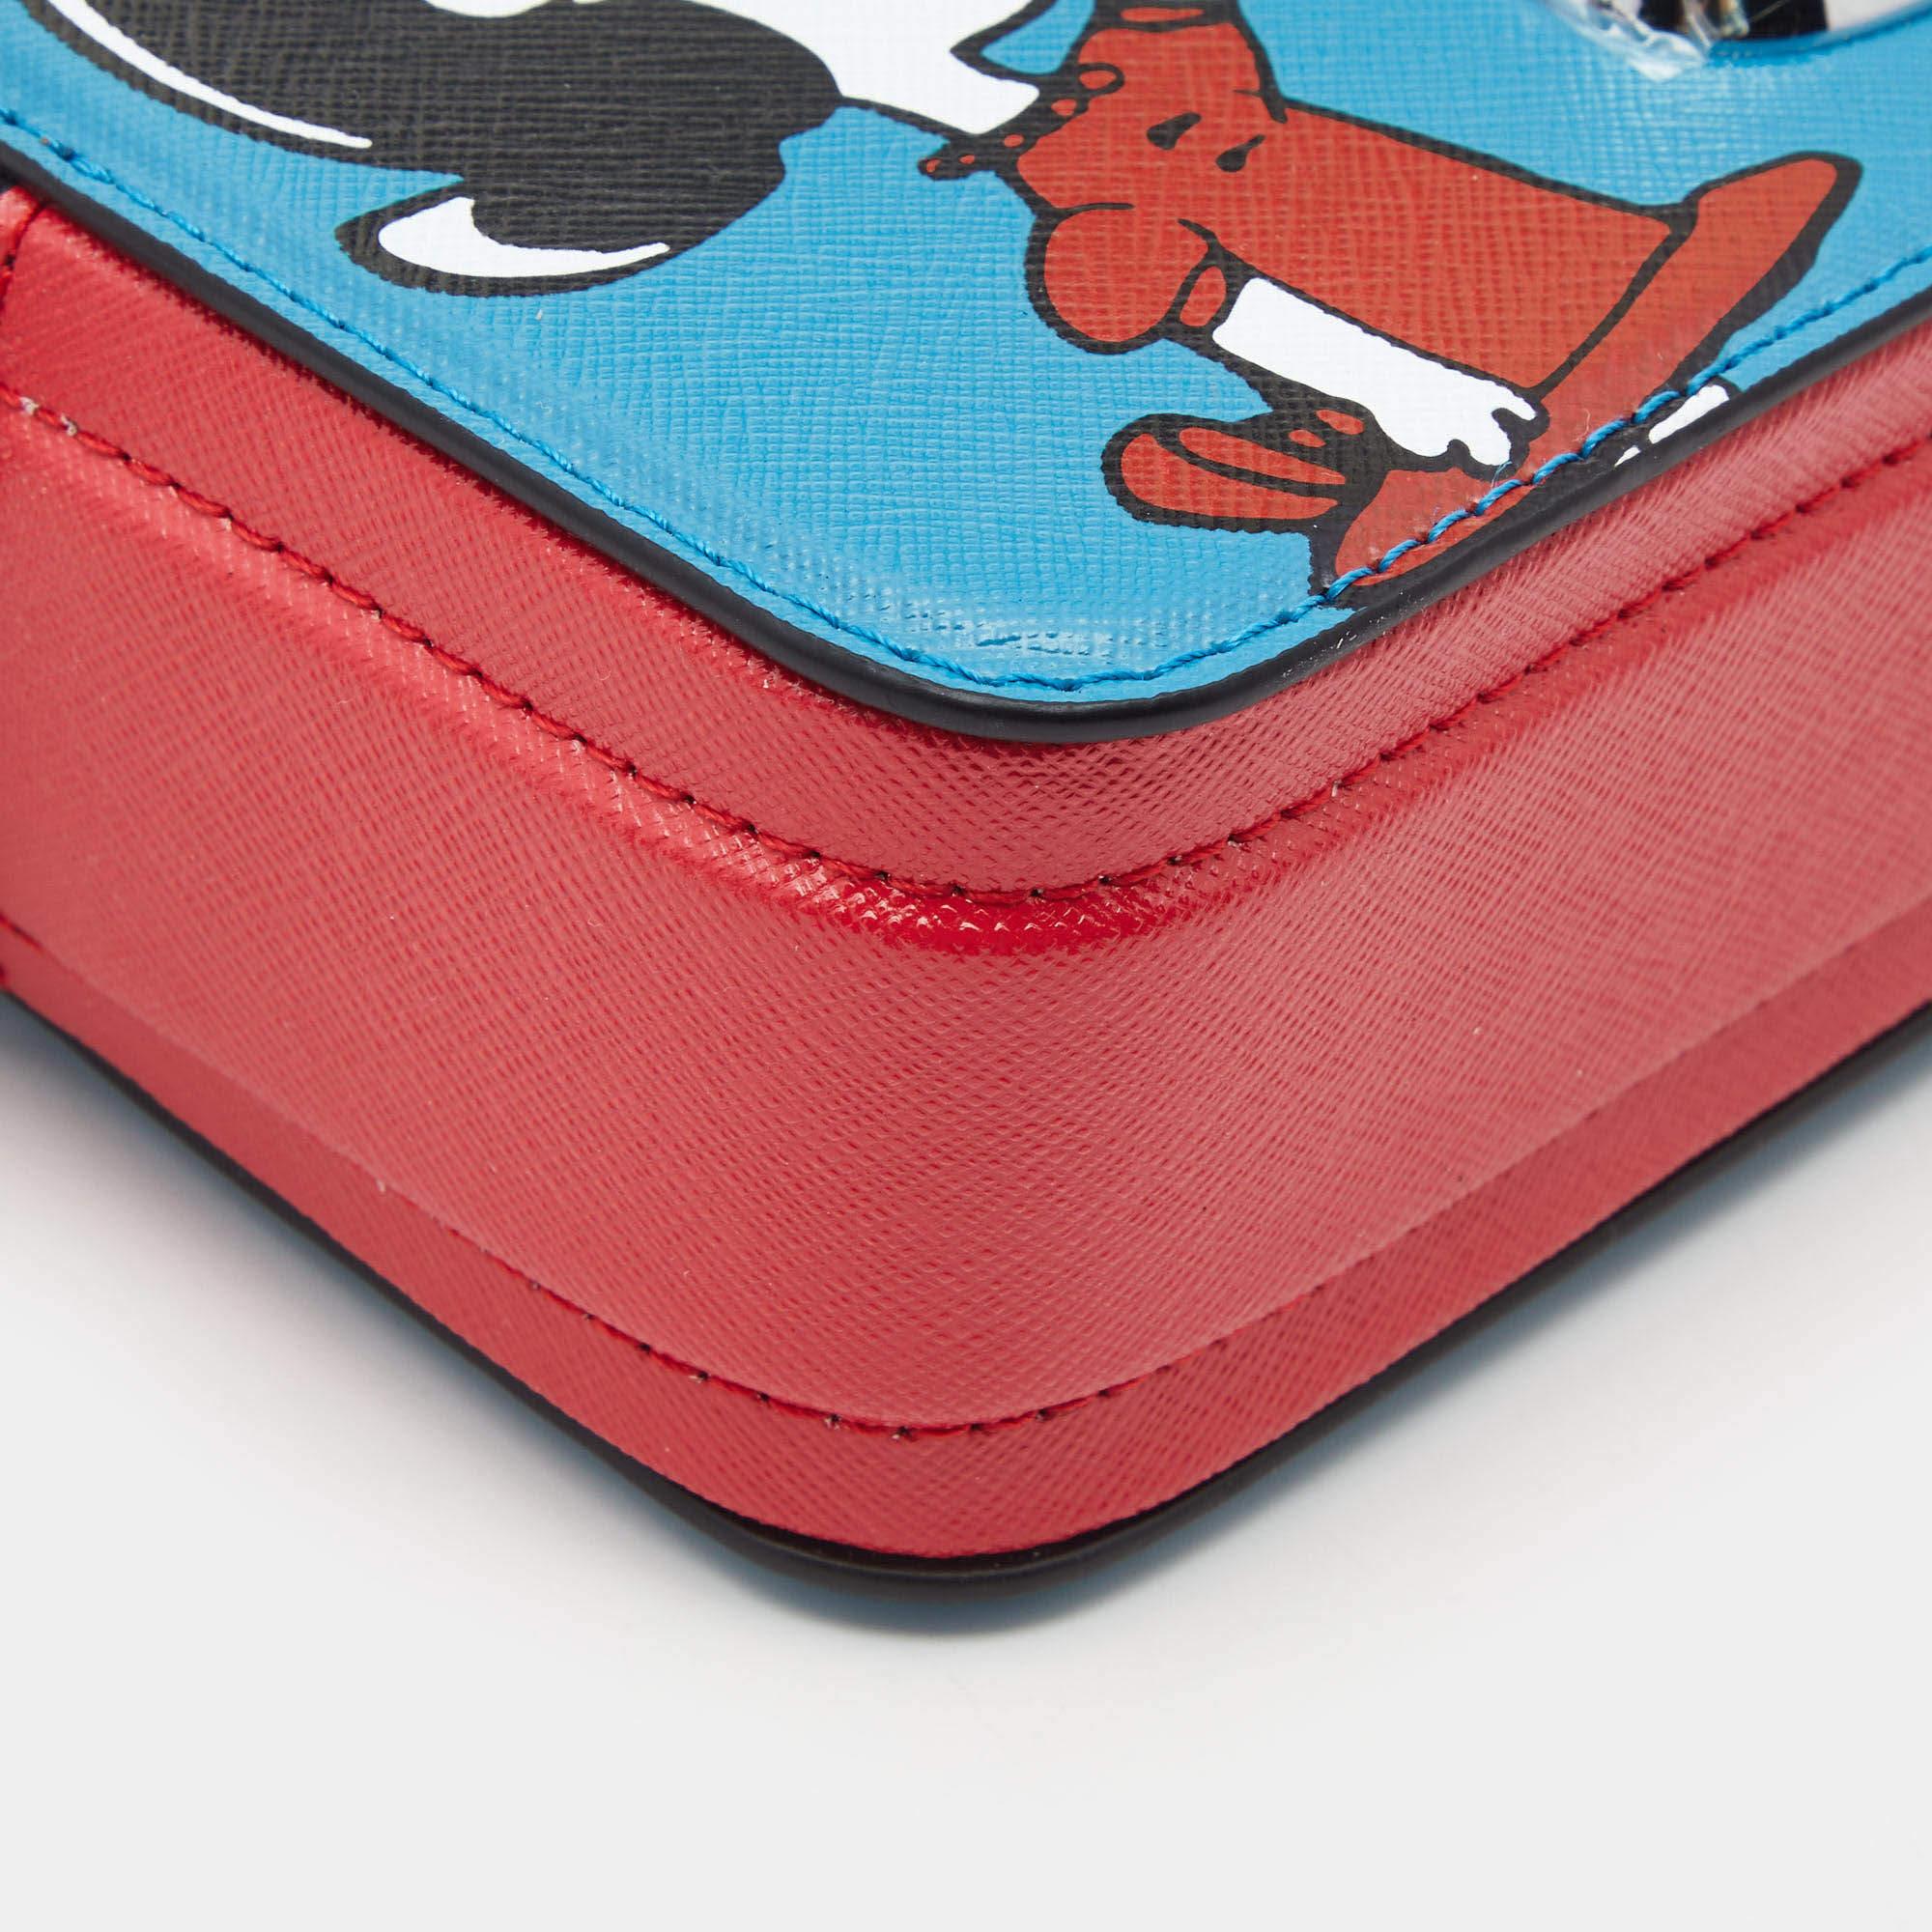 Marc Jacobs x Peanuts Multicolor Leather Snapshot Snoopy Camera Bag 1